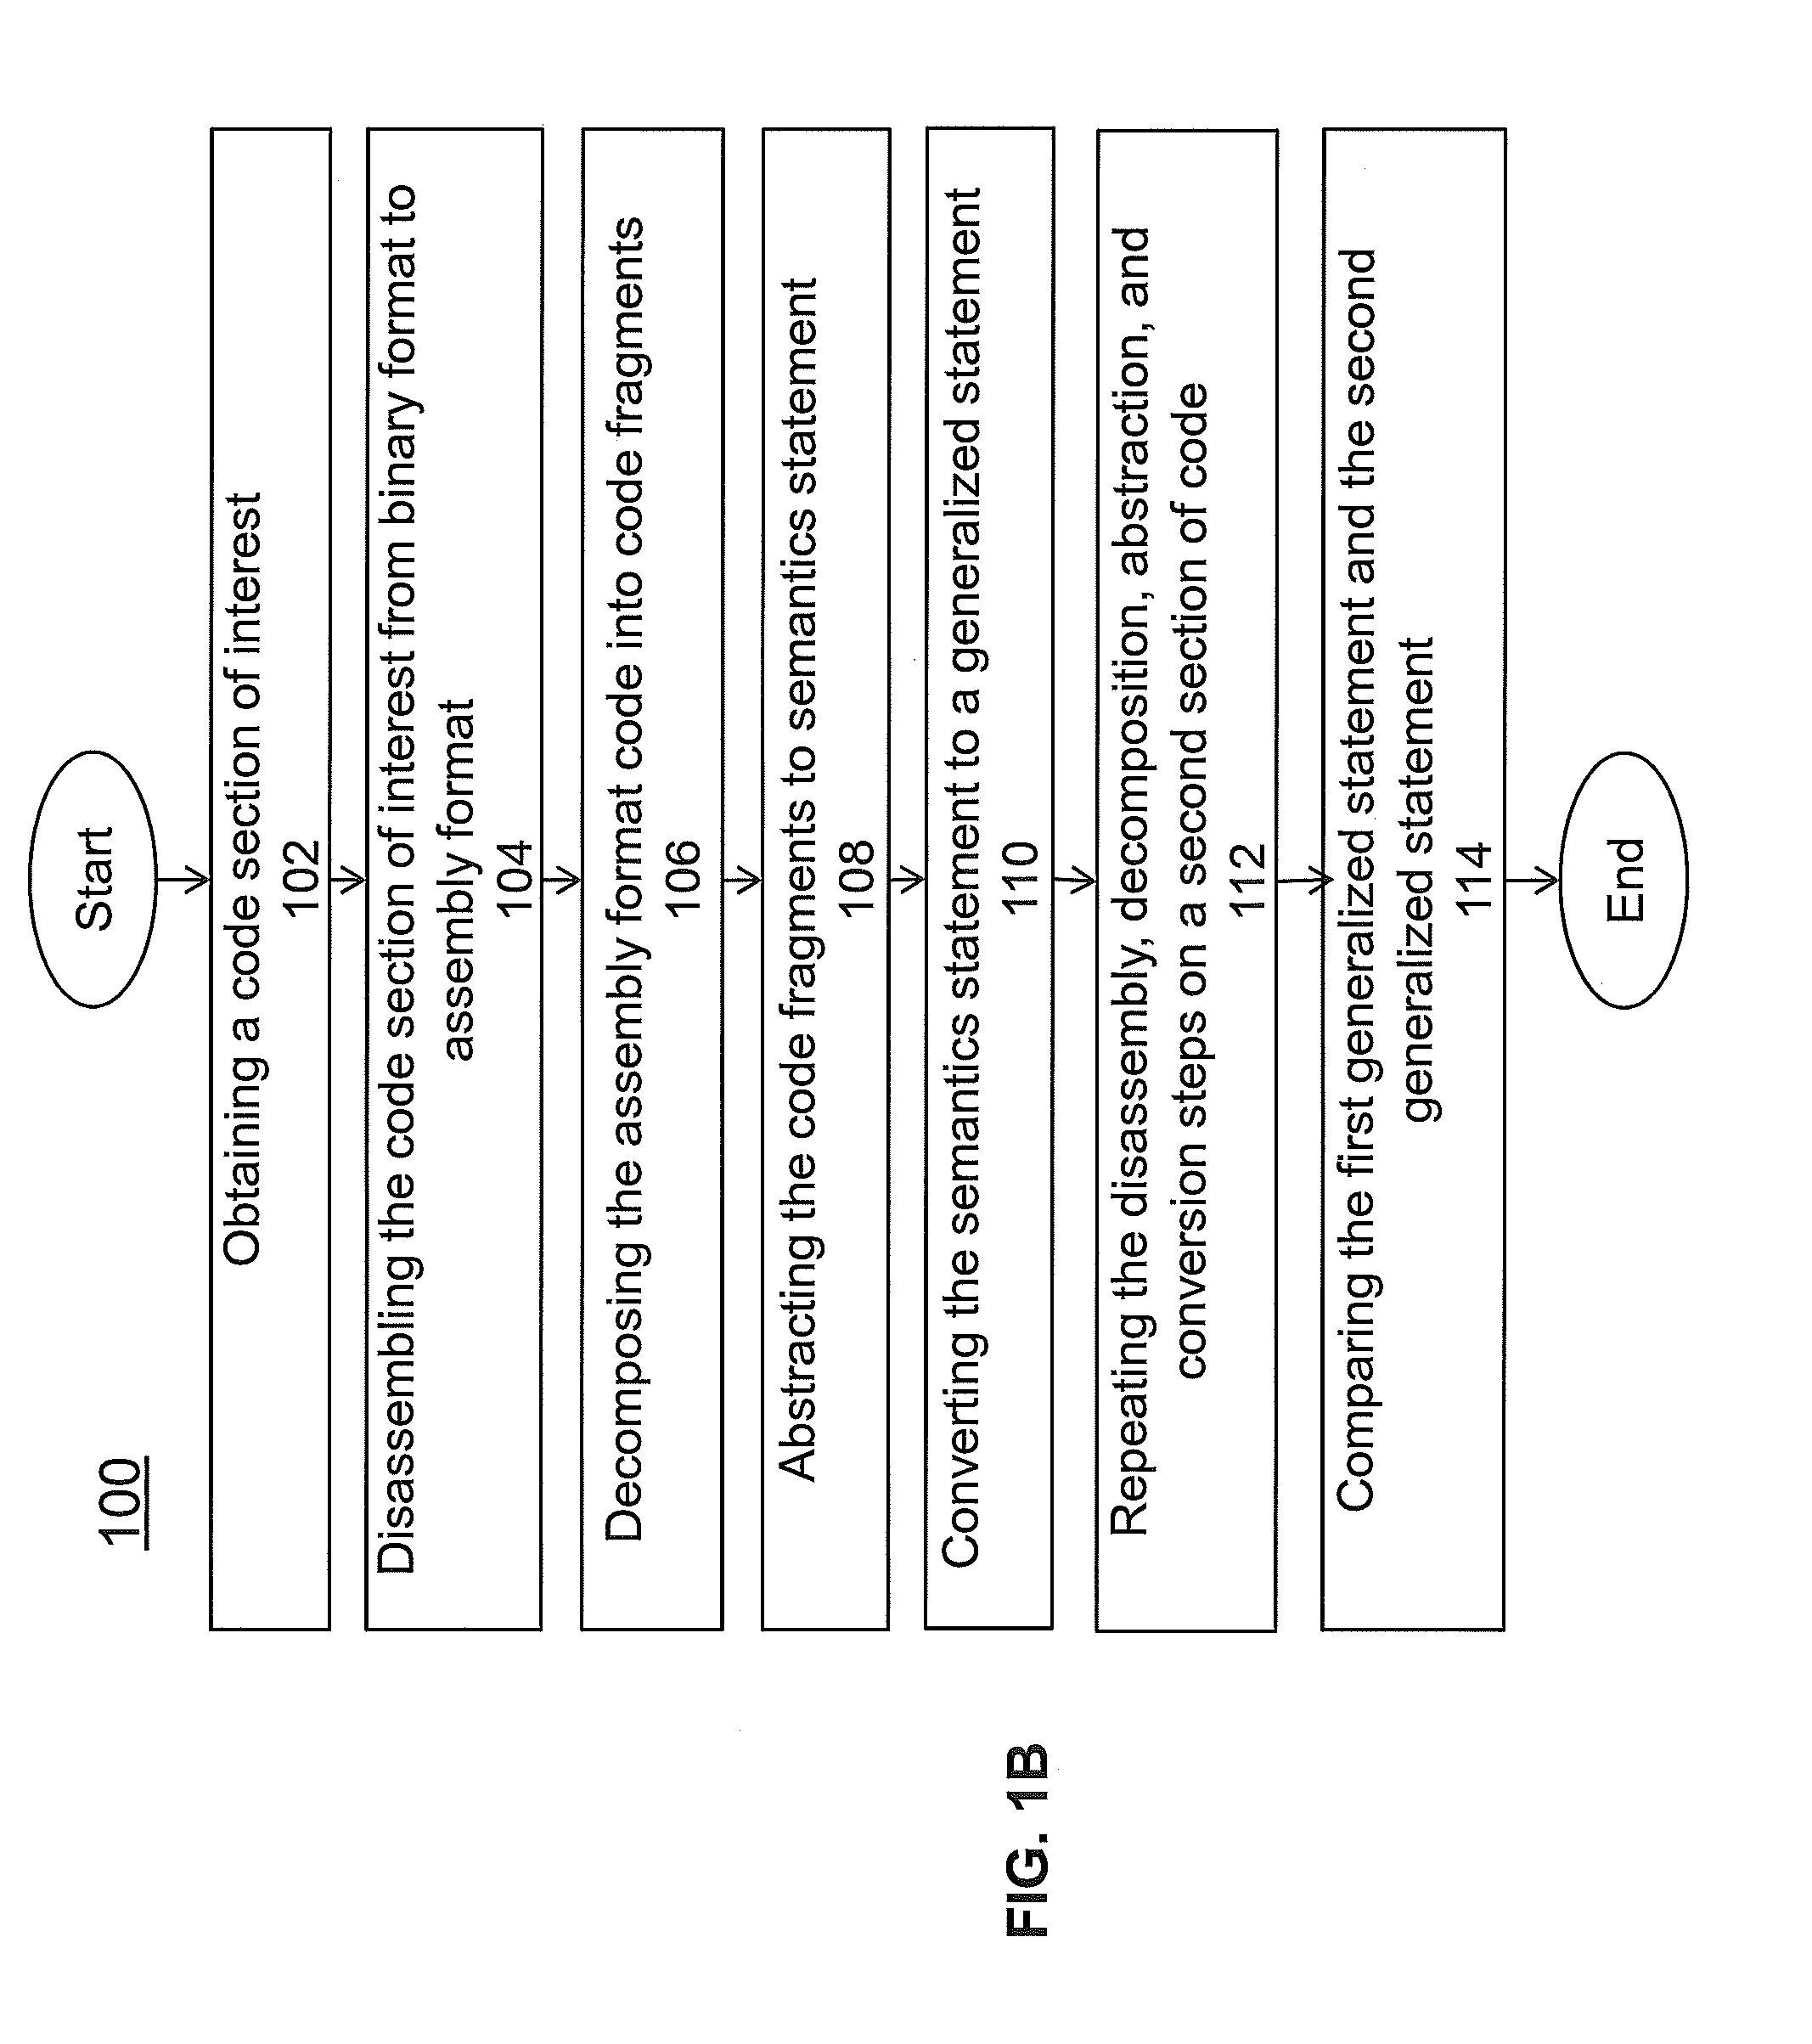 System and method for identifying and comparing code by semantic abstractions